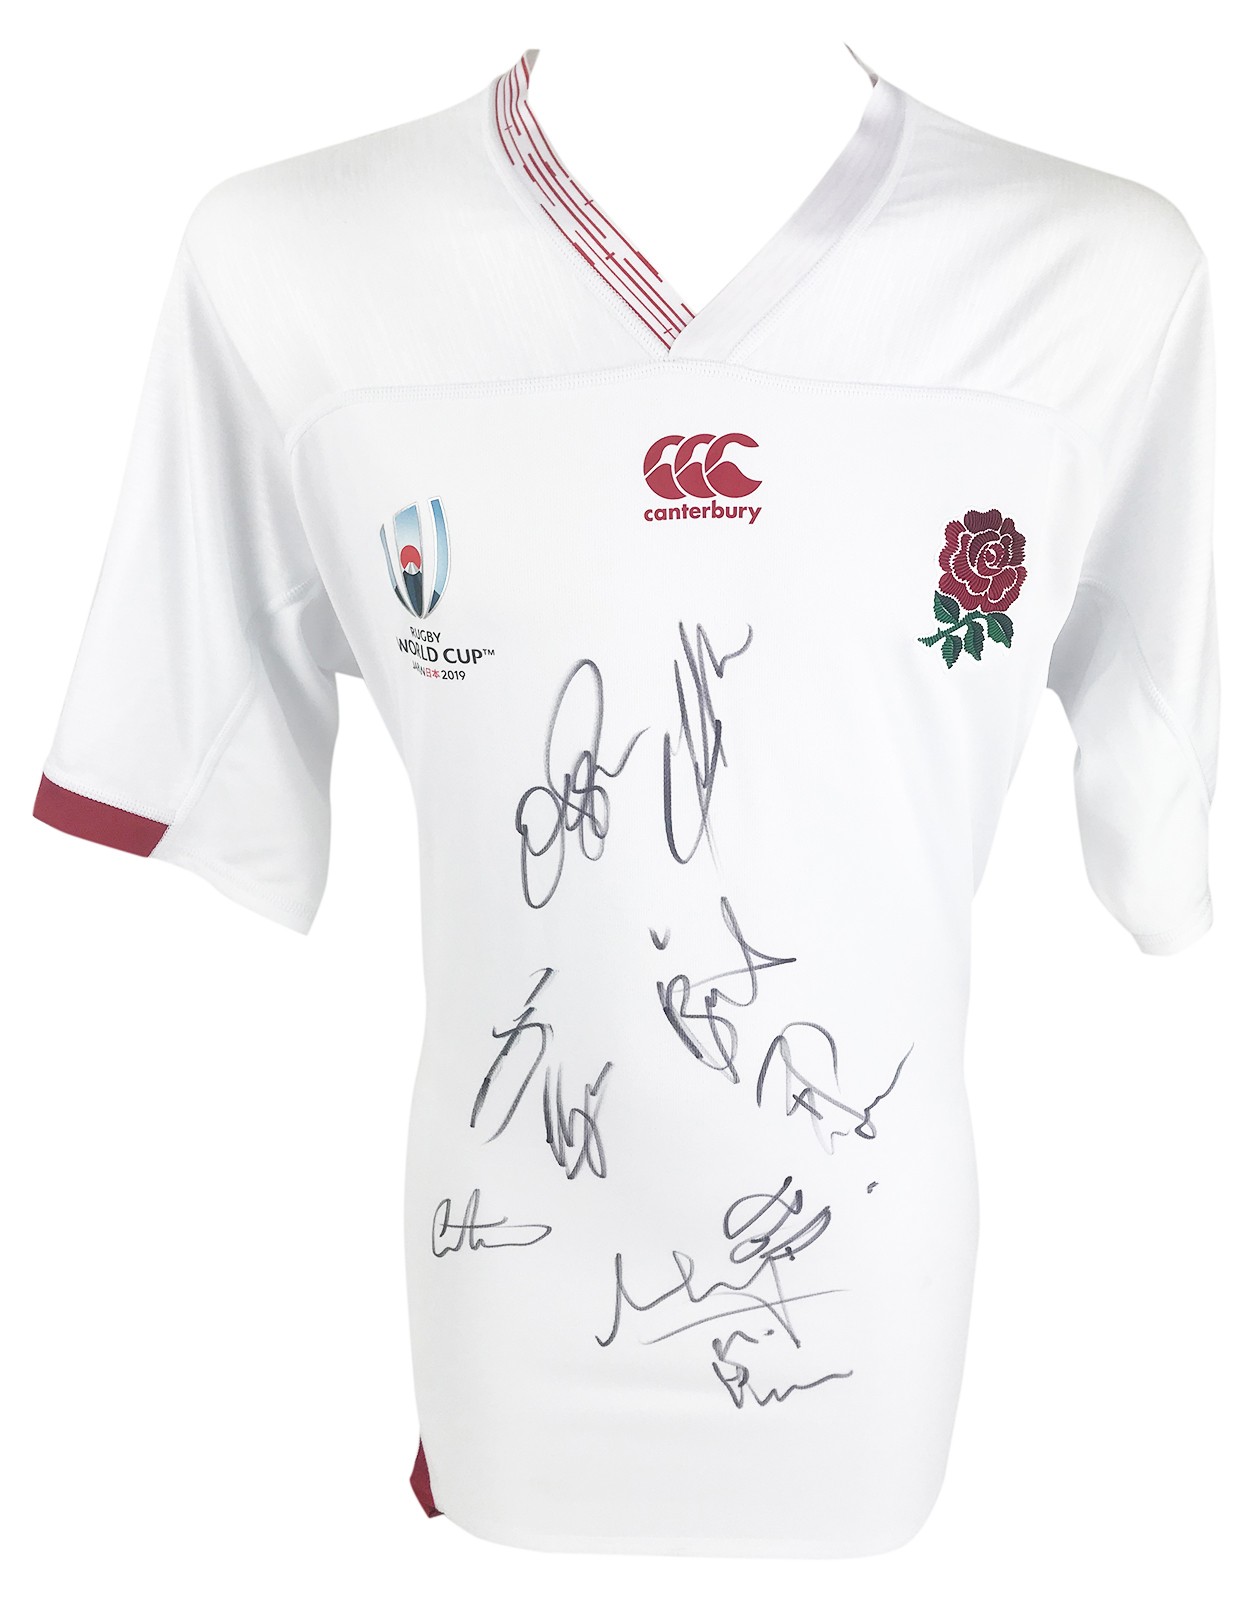 england rugby jersey 2019 world cup